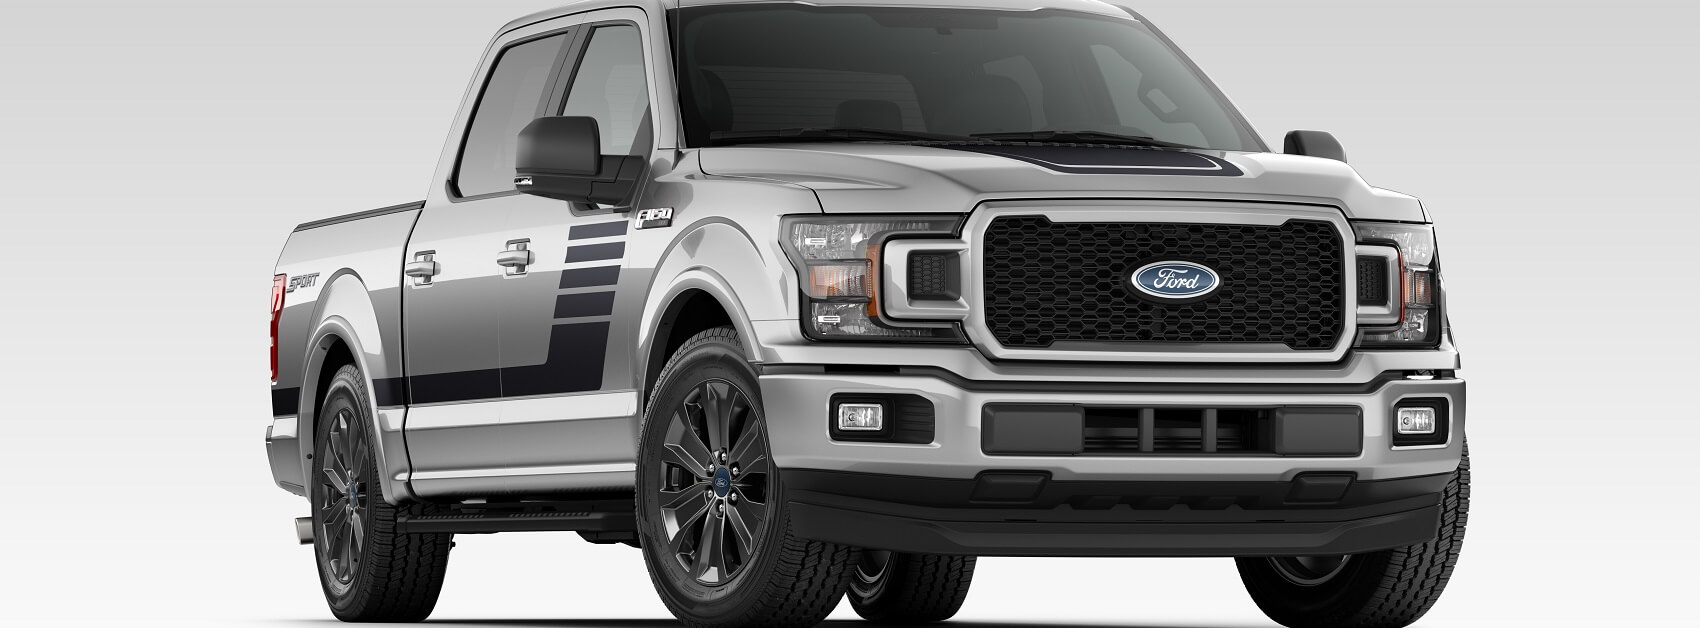 Used Ford Dealer near Me Delaware OH | Byers Ford